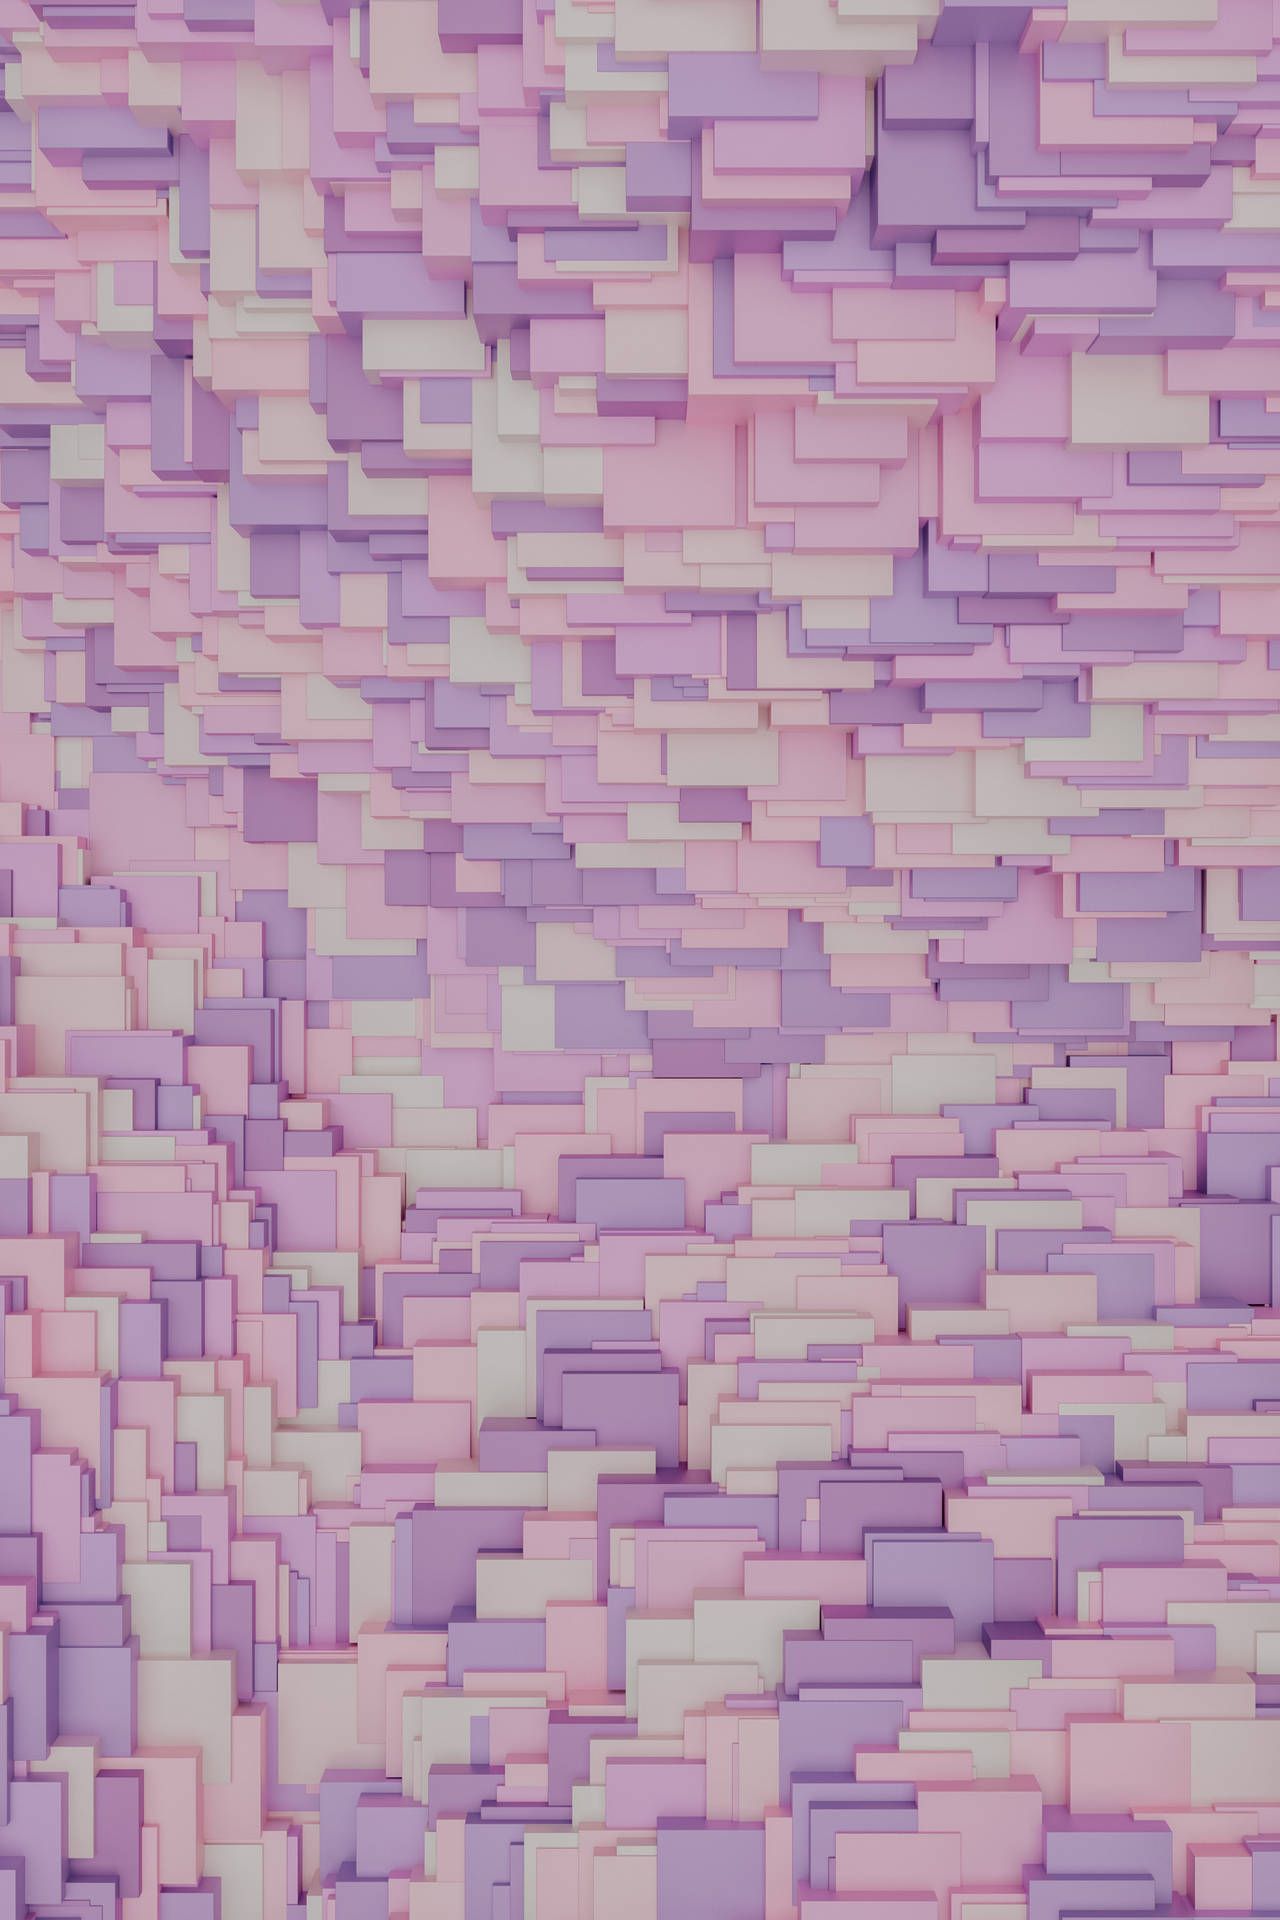 A purple and pink cube pattern on the ground - 3D, lavender